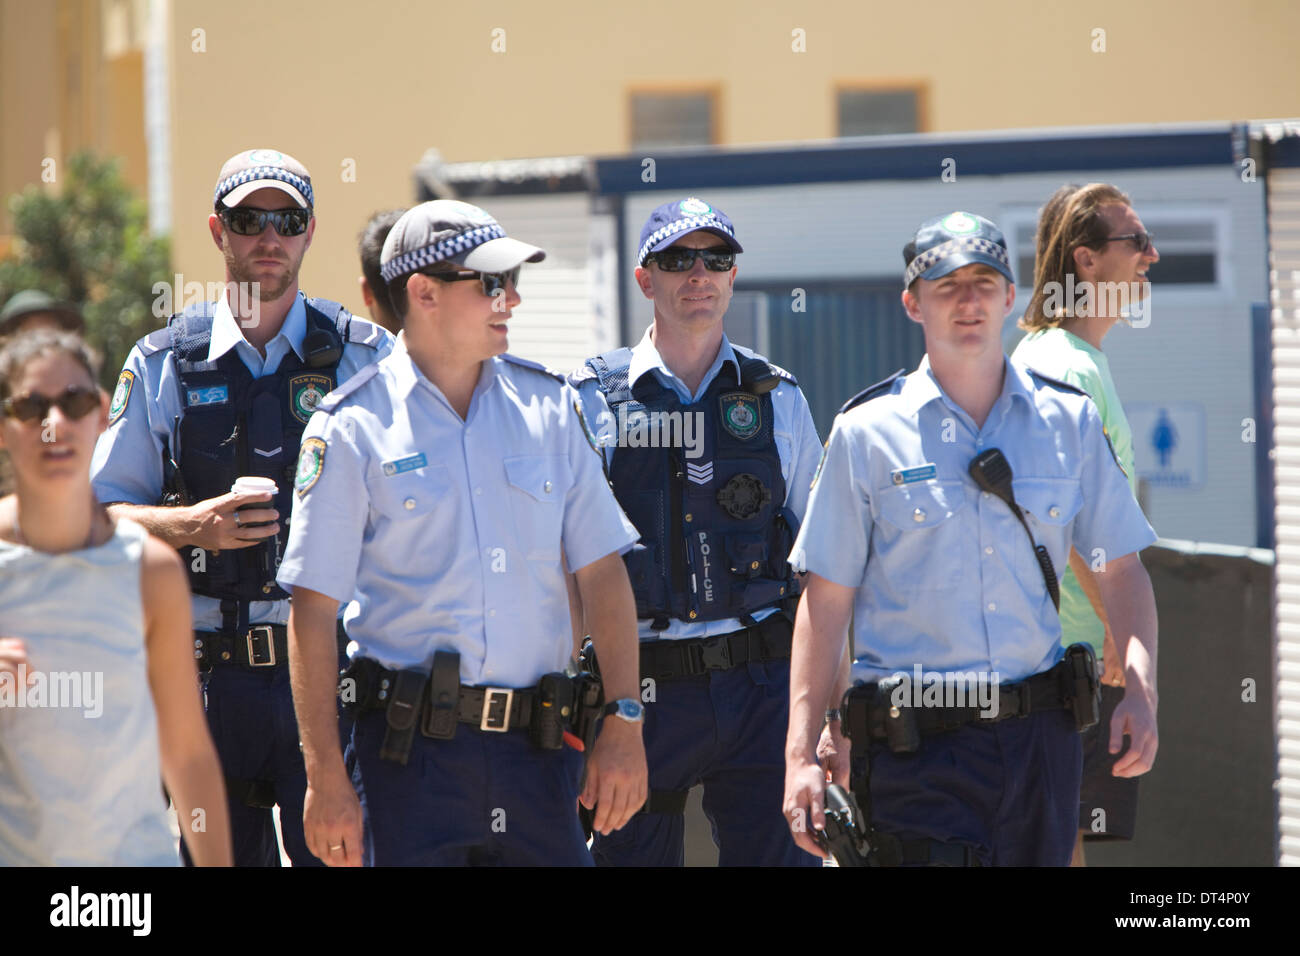 Australian police officers patrolling in Manly during the australian open of surfing,Sydney,NSW, Australia Stock Photo